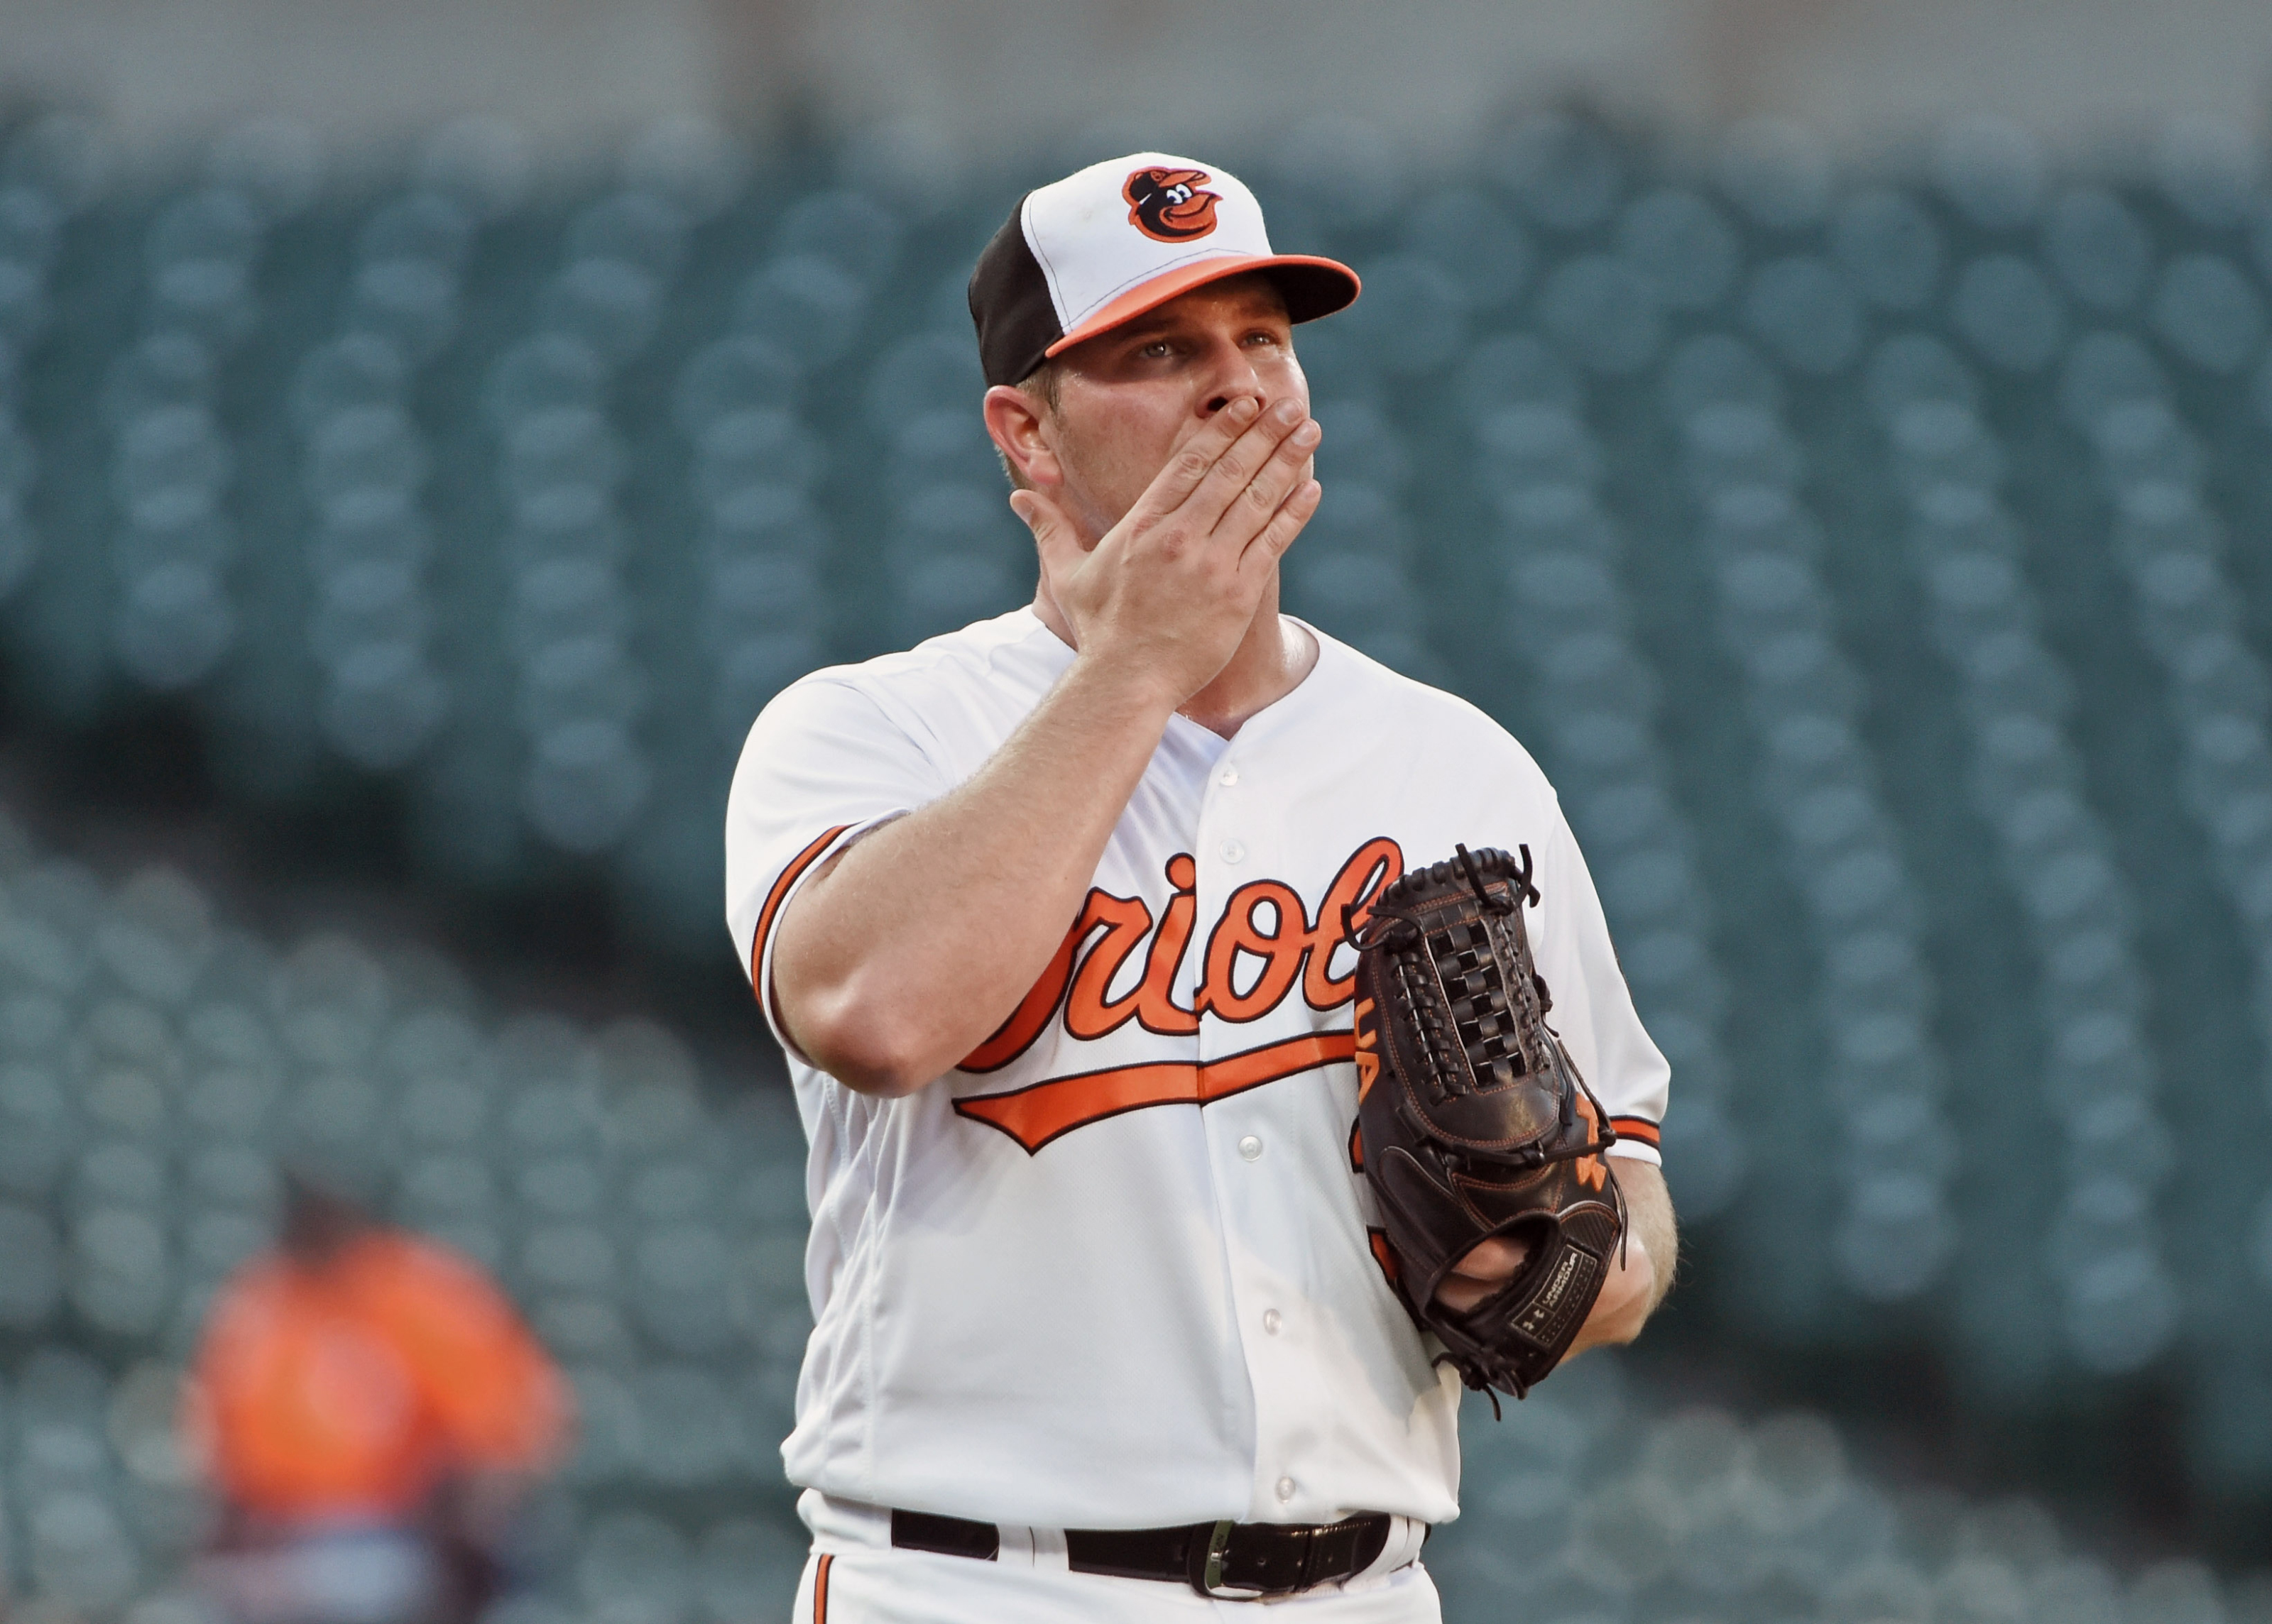 The Orioles' Dylan Bundy made arguably the worst start in MLB history